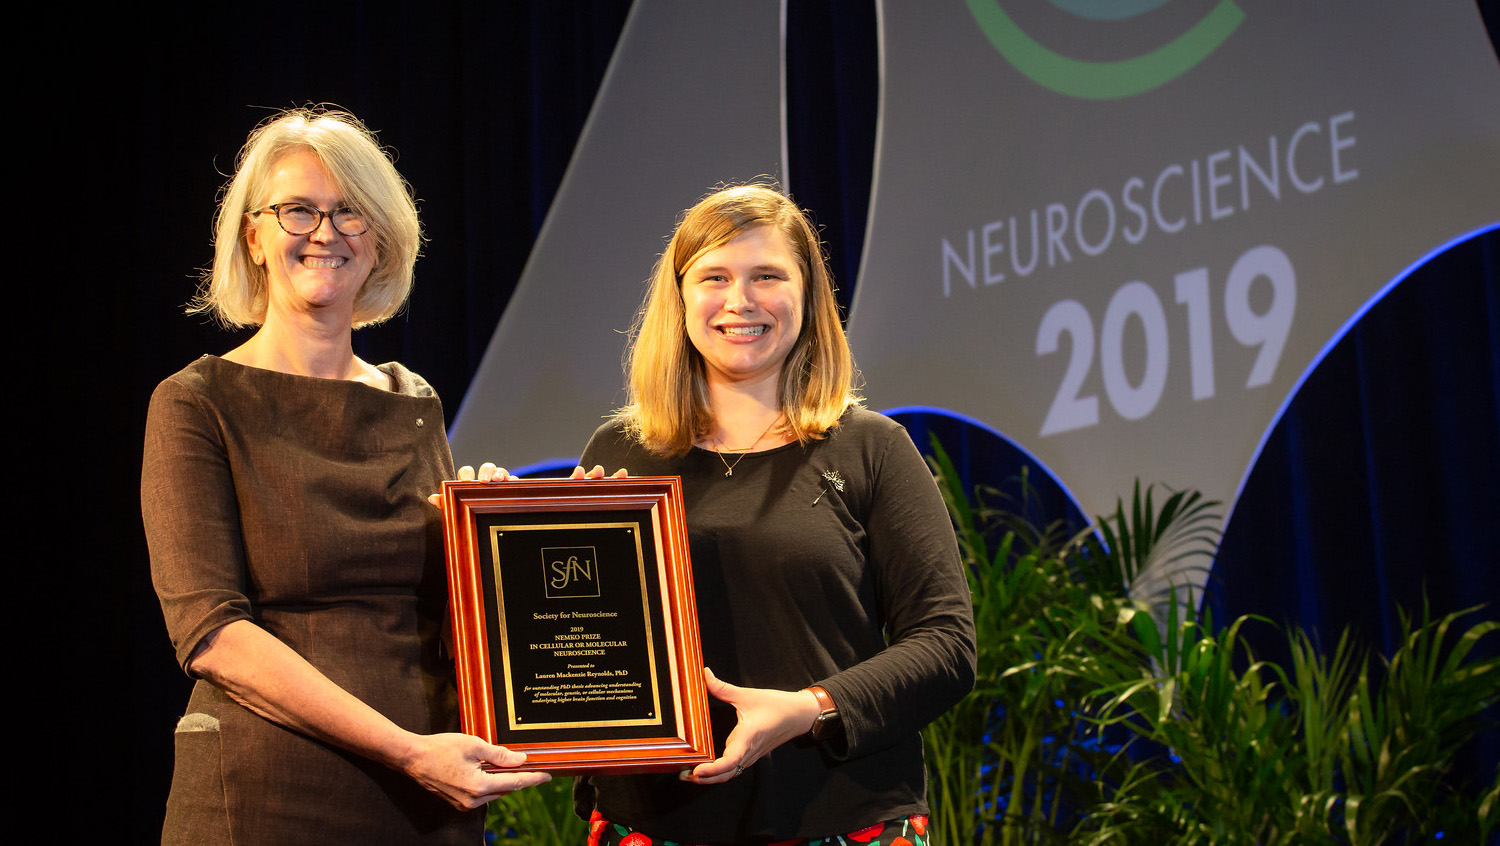 Lauren Mackenzie Reynolds, PhD (right), of Sorbonne Université accepts the Nemko Prize in Cellular and Molecular Neuroscience